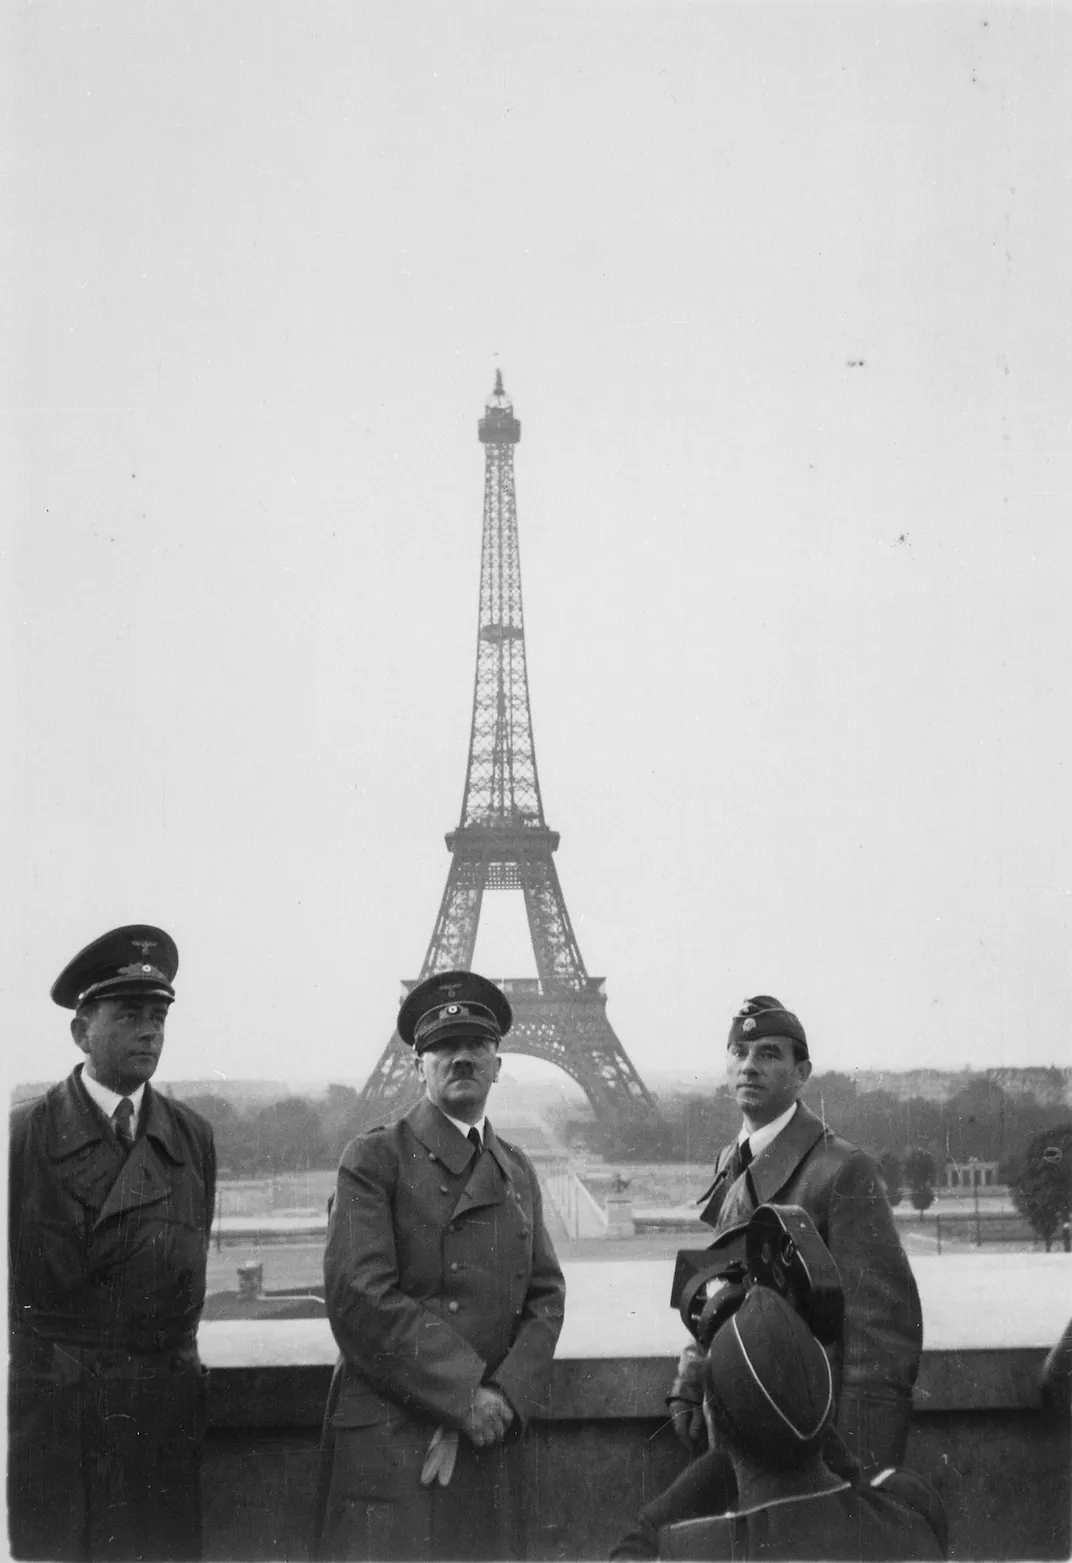 Adolf Hitler in front of the Eiffel Tower during the Nazis' occupation of Paris